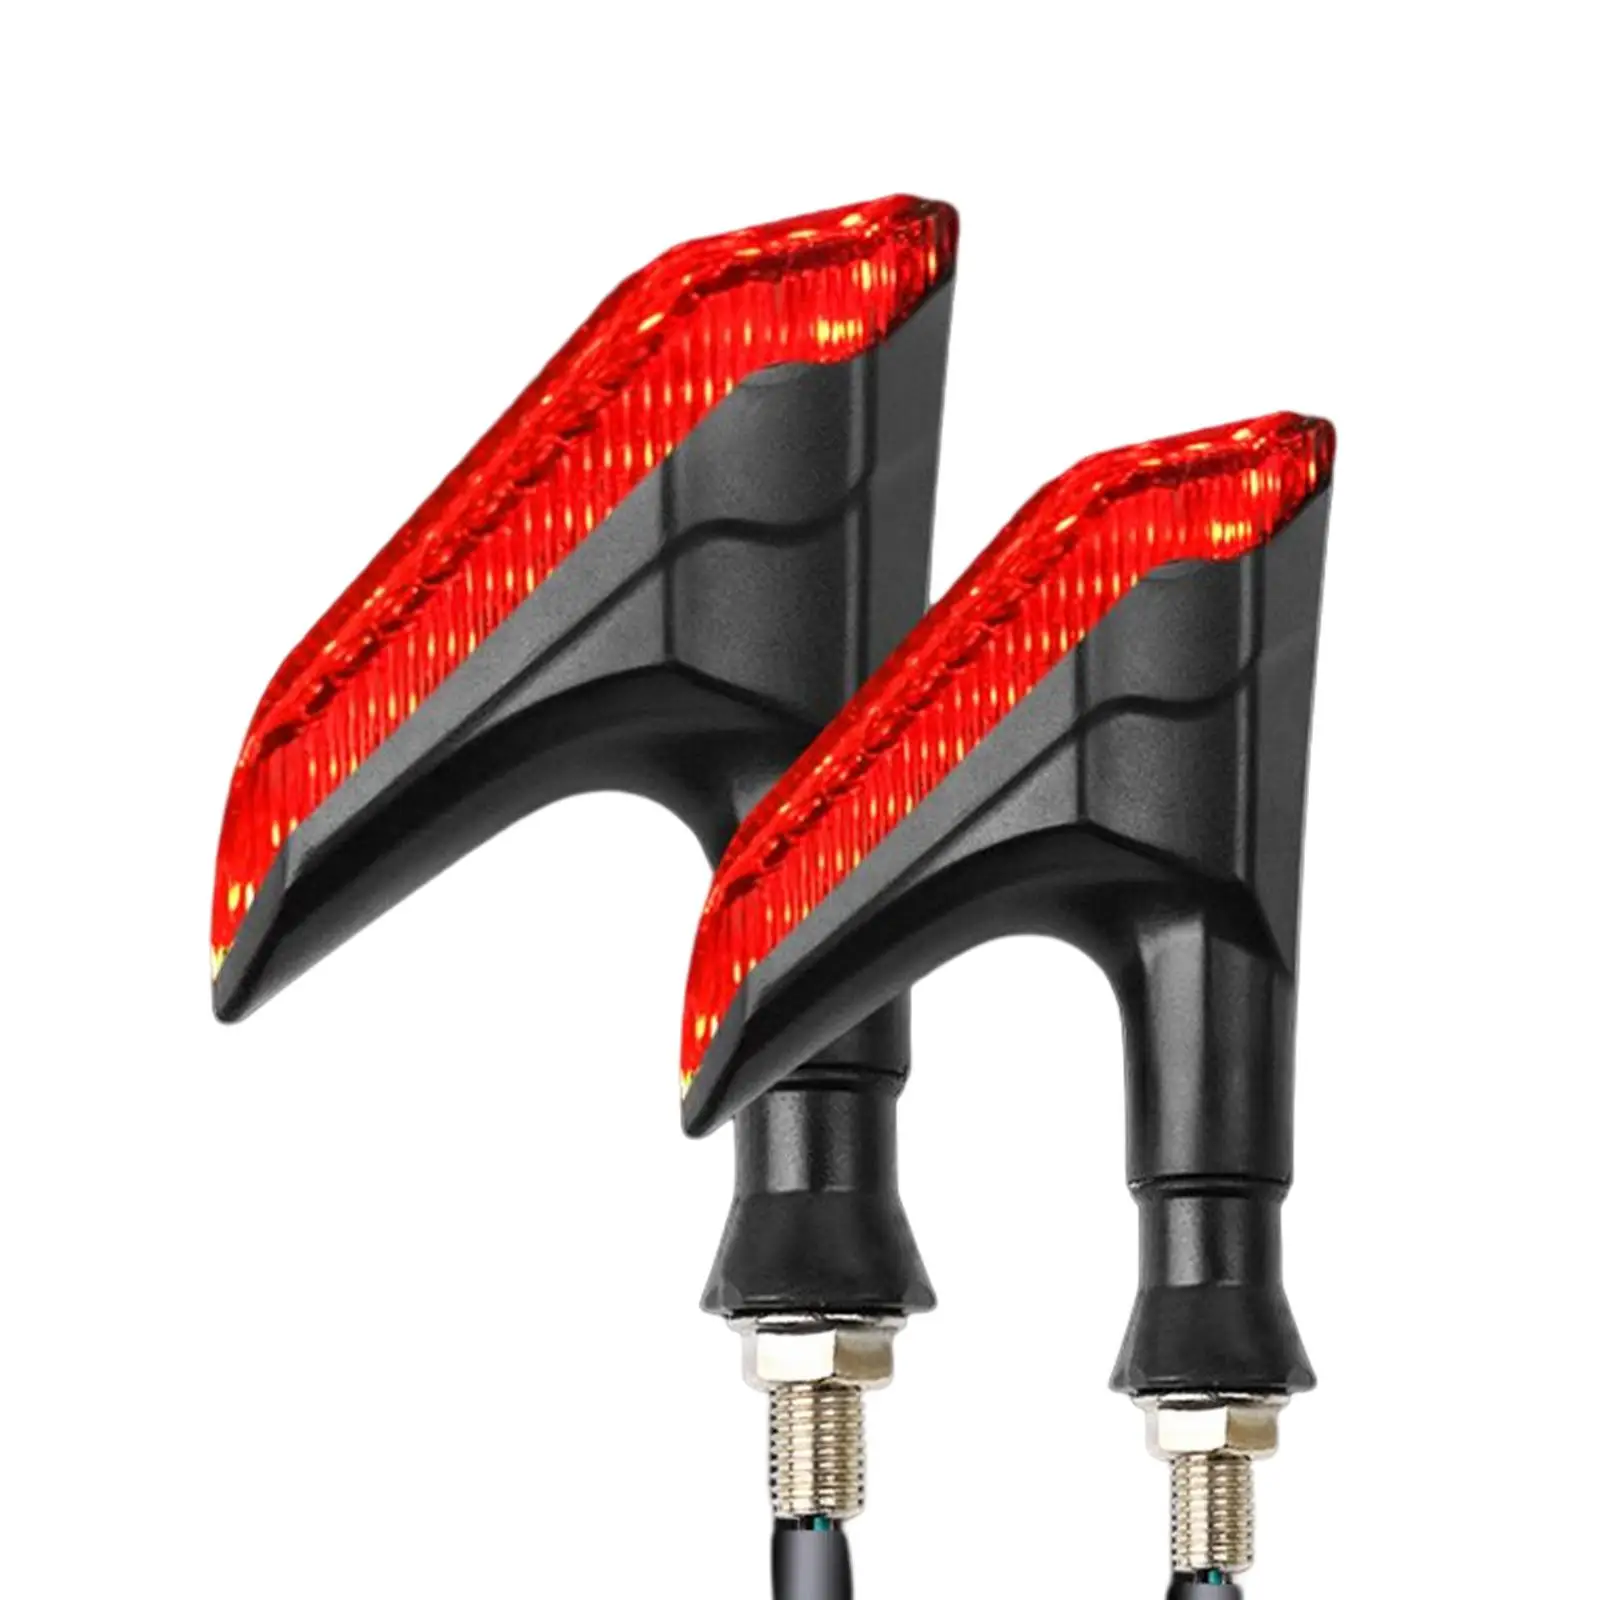 Motorcycle Turn Signal Light, Consumption, High Brightness ,Indicator Light Brake Lamps Day Running Light for Electric Vehicle